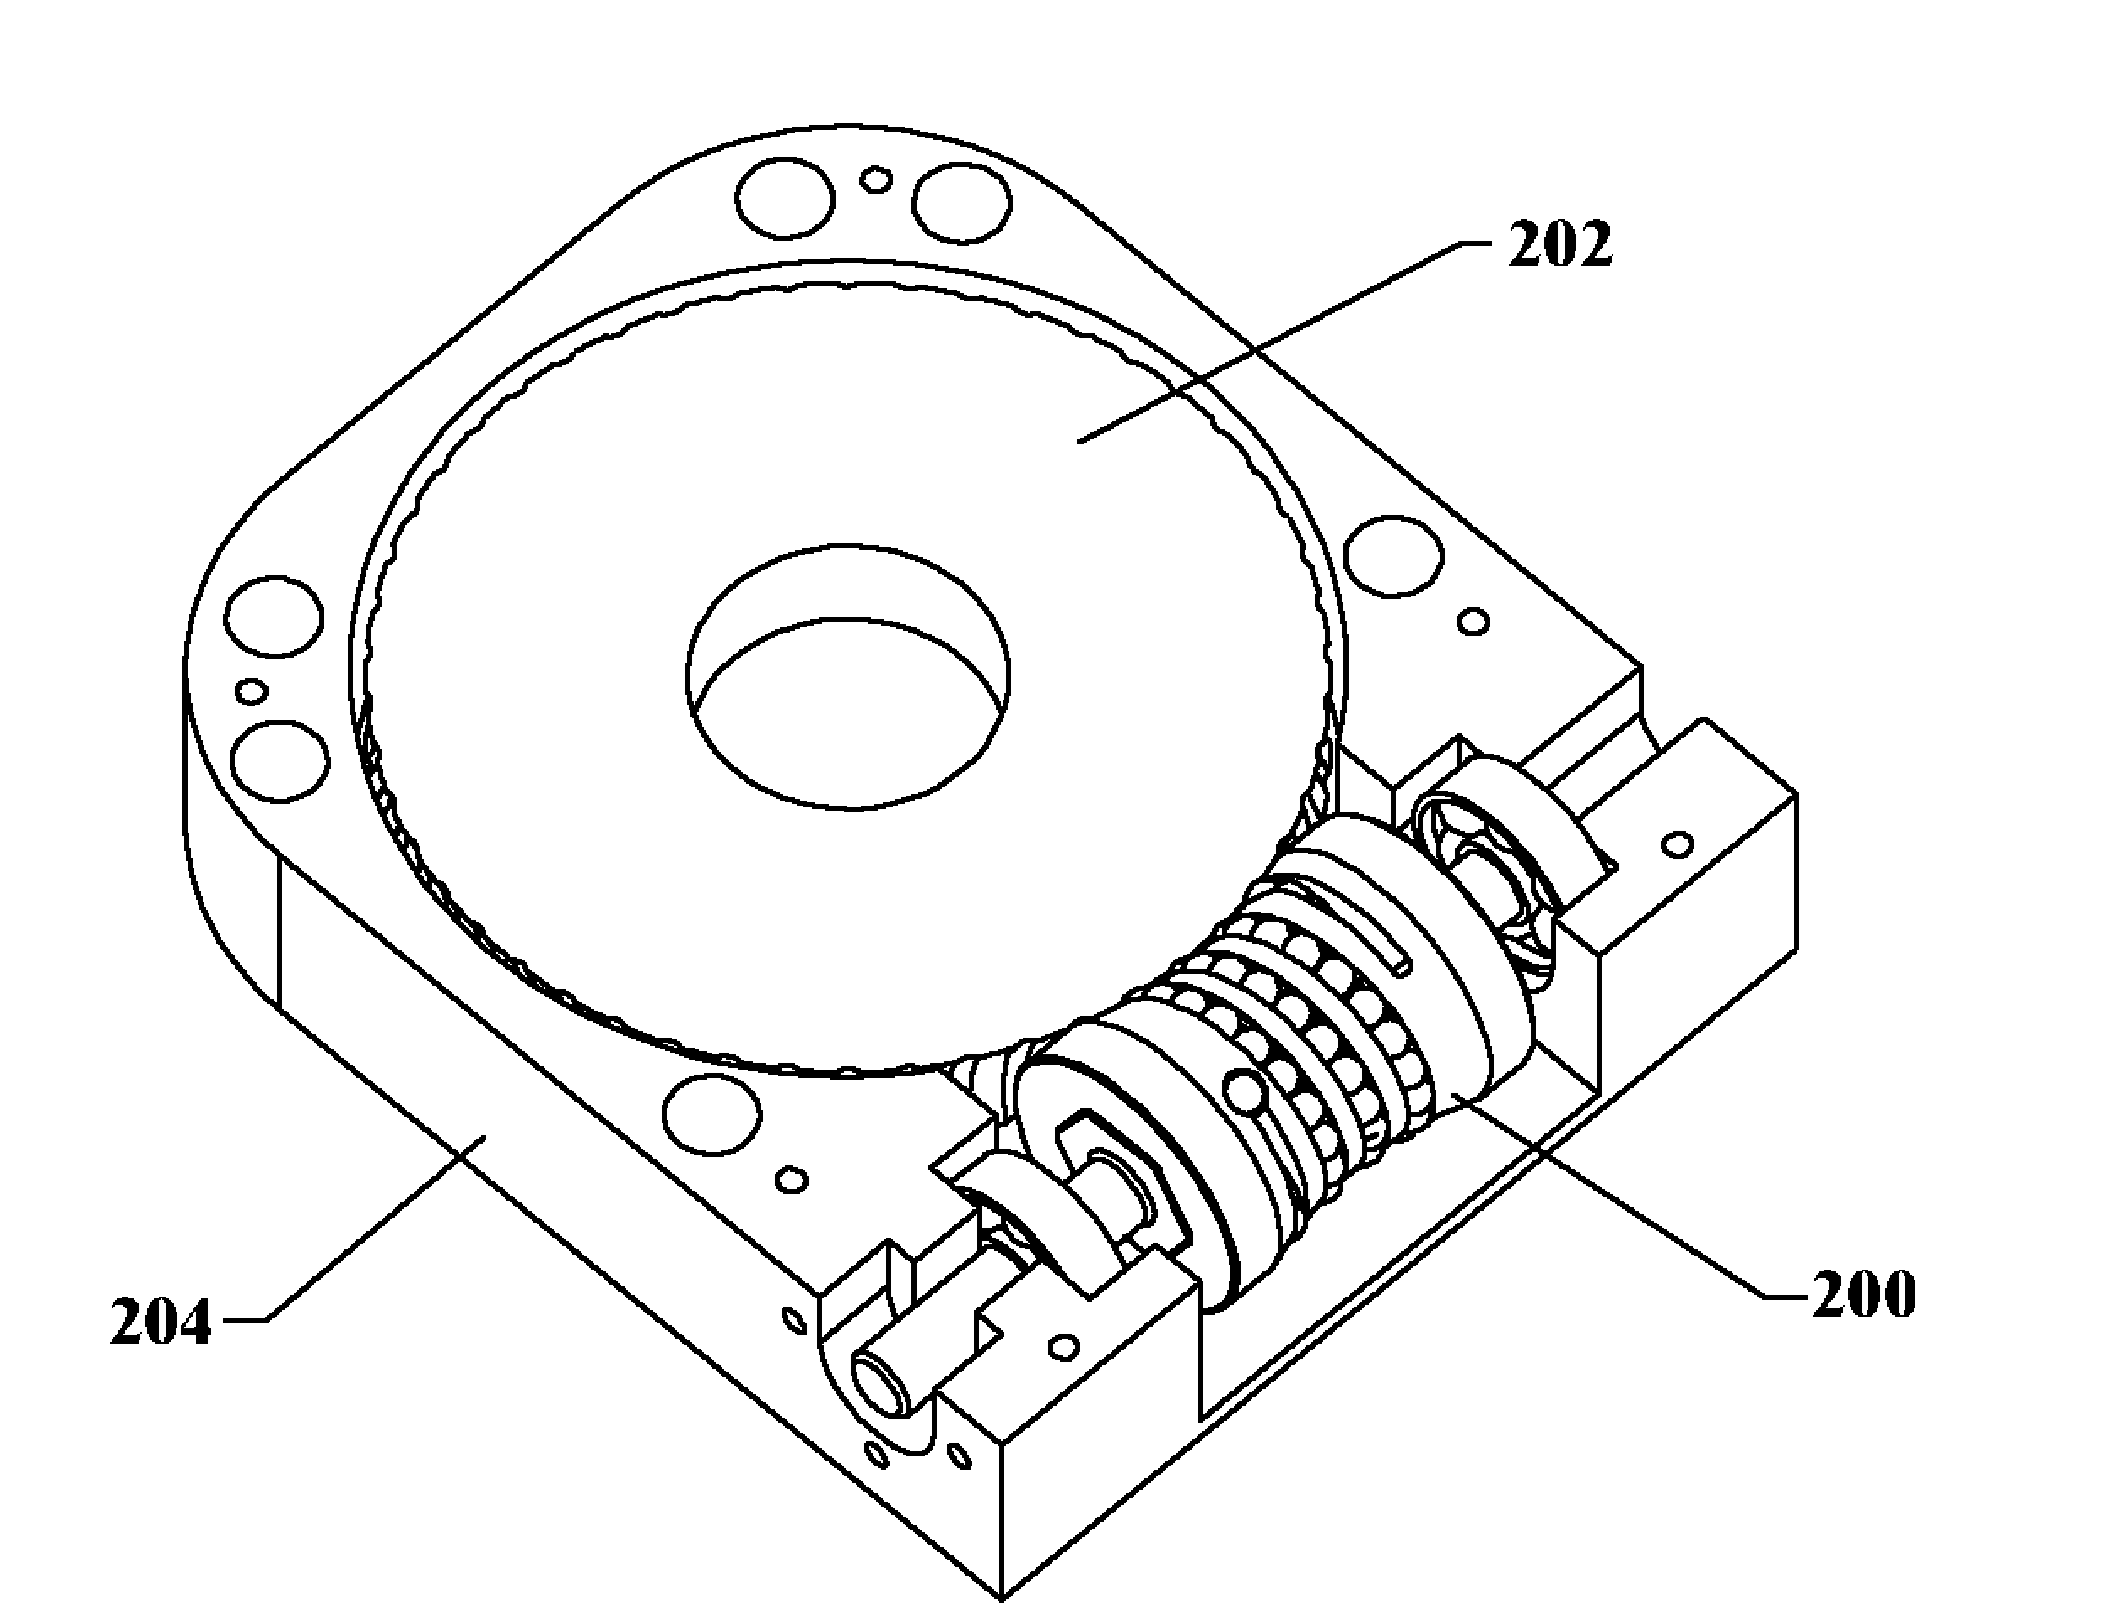 Self-Retaining Recirculating Ball-Worm and Gear Device